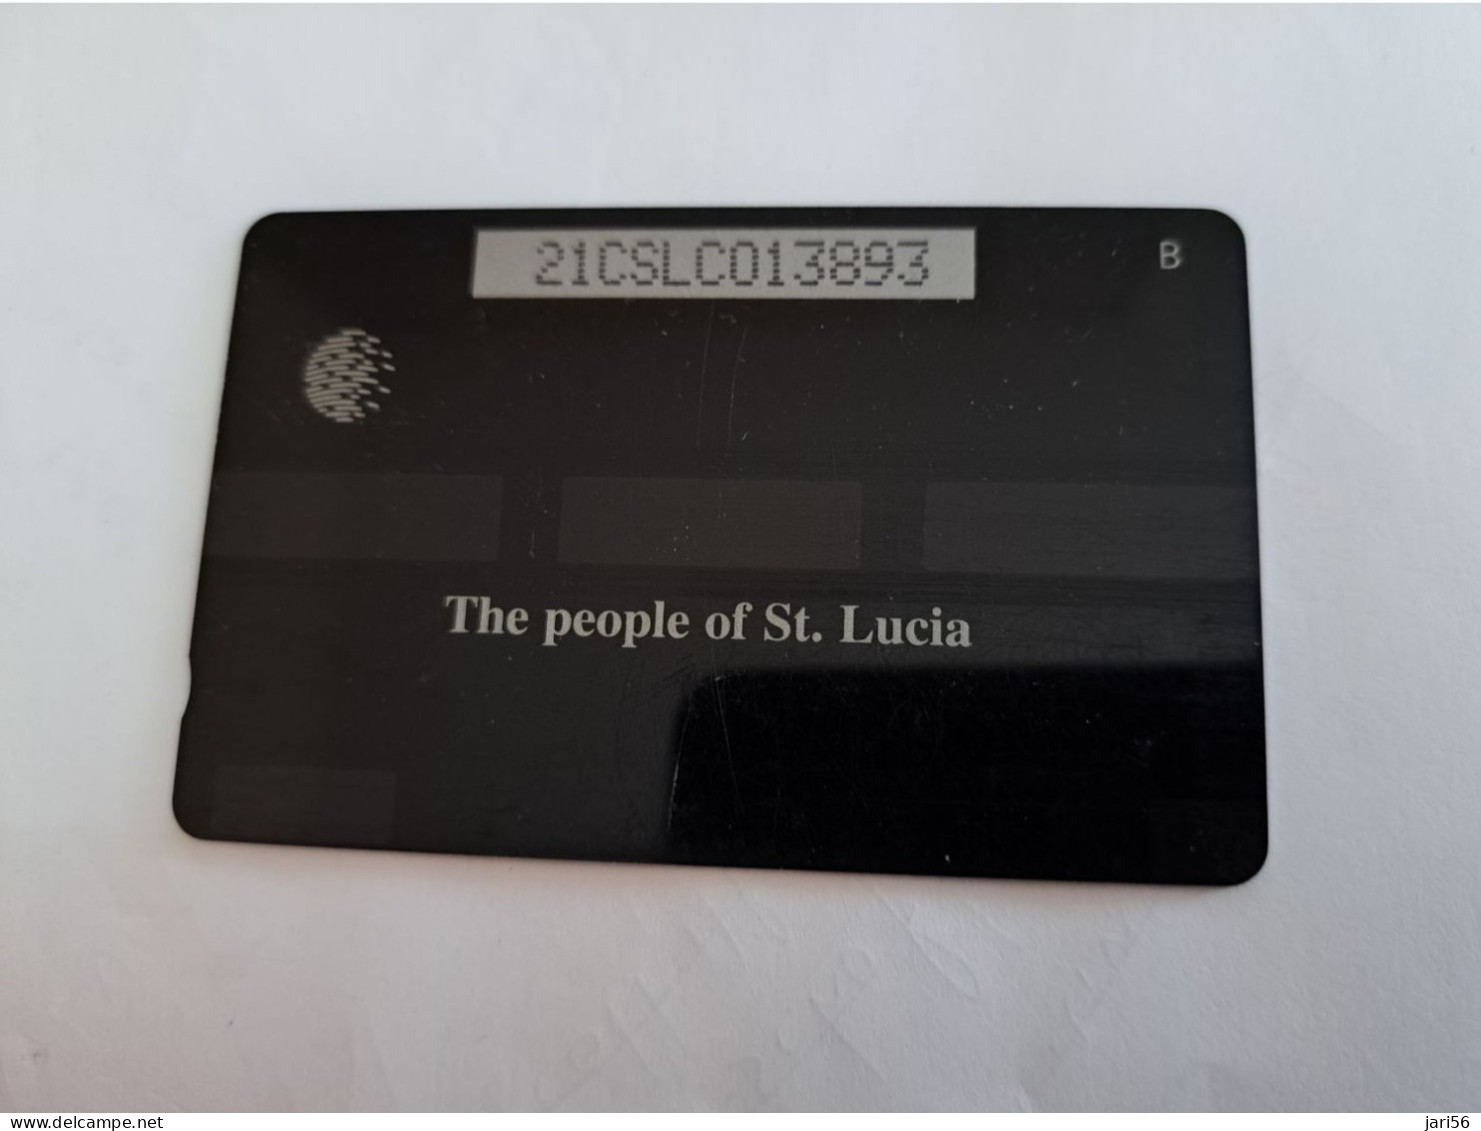 ST LUCIA    $ 40   CABLE & WIRELESS  STL-21C  21CSLC  PEOPLE OF ST LUCIA     Fine Used Card ** 14270** - Sainte Lucie